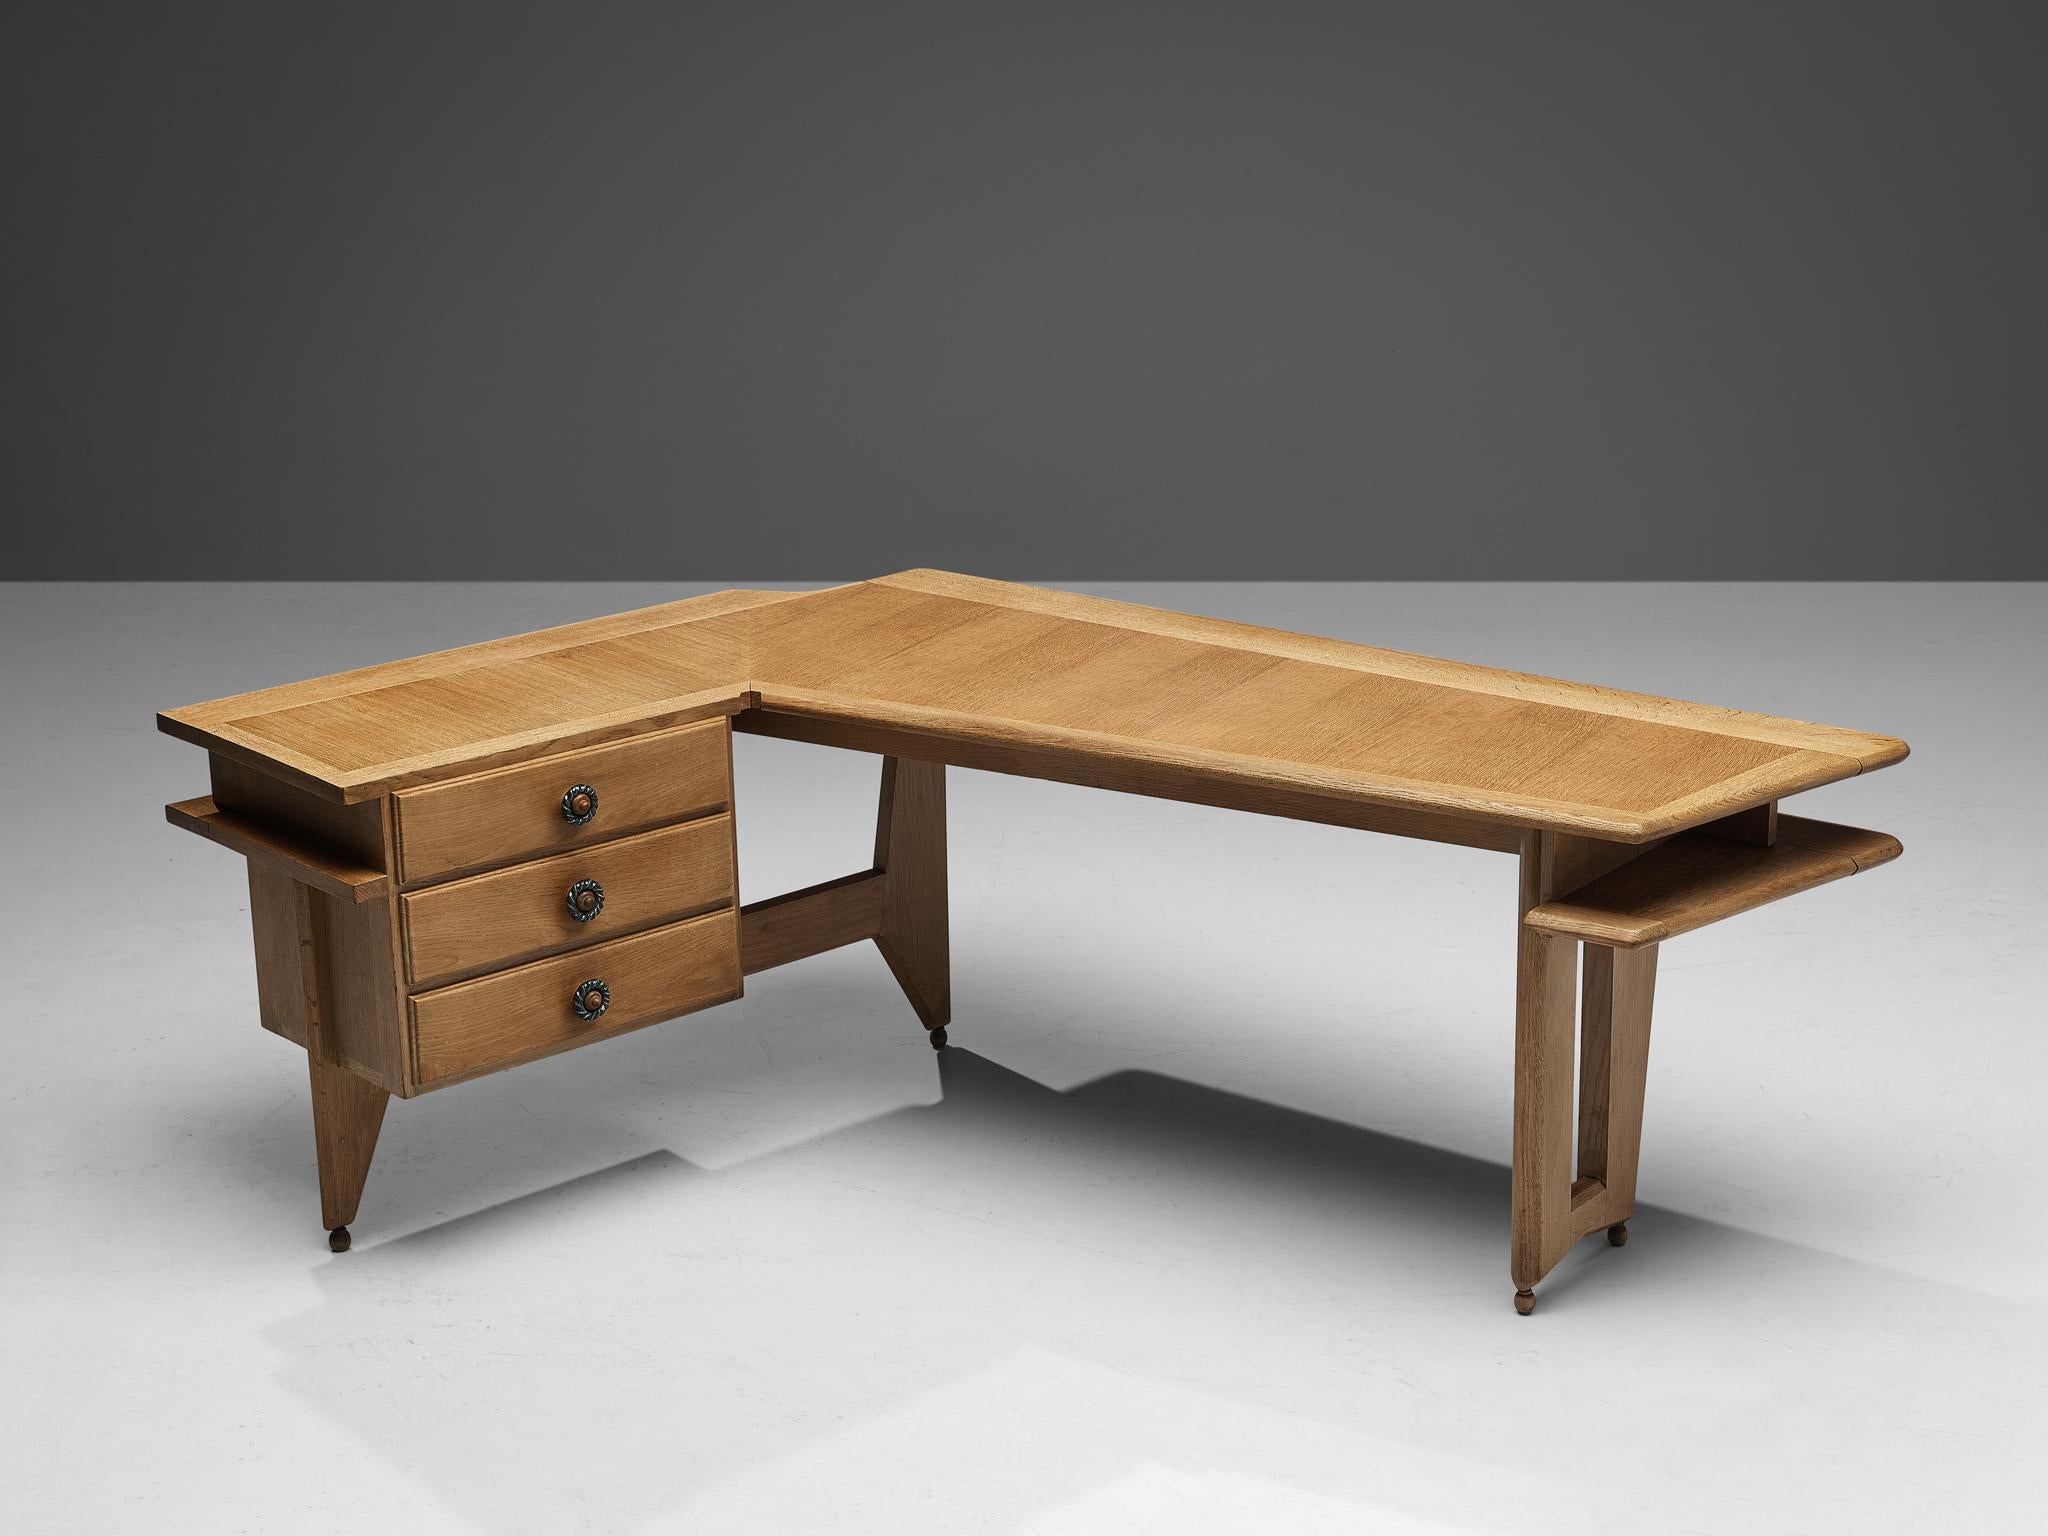 Guillerme et Chambron, corner desk, oak, ceramic, France, 1960s.

This writing desk is executed in solid oak by French designers Guillerme et Chambron. The elegant corner desk shows interesting details. First there is the top which is based on a